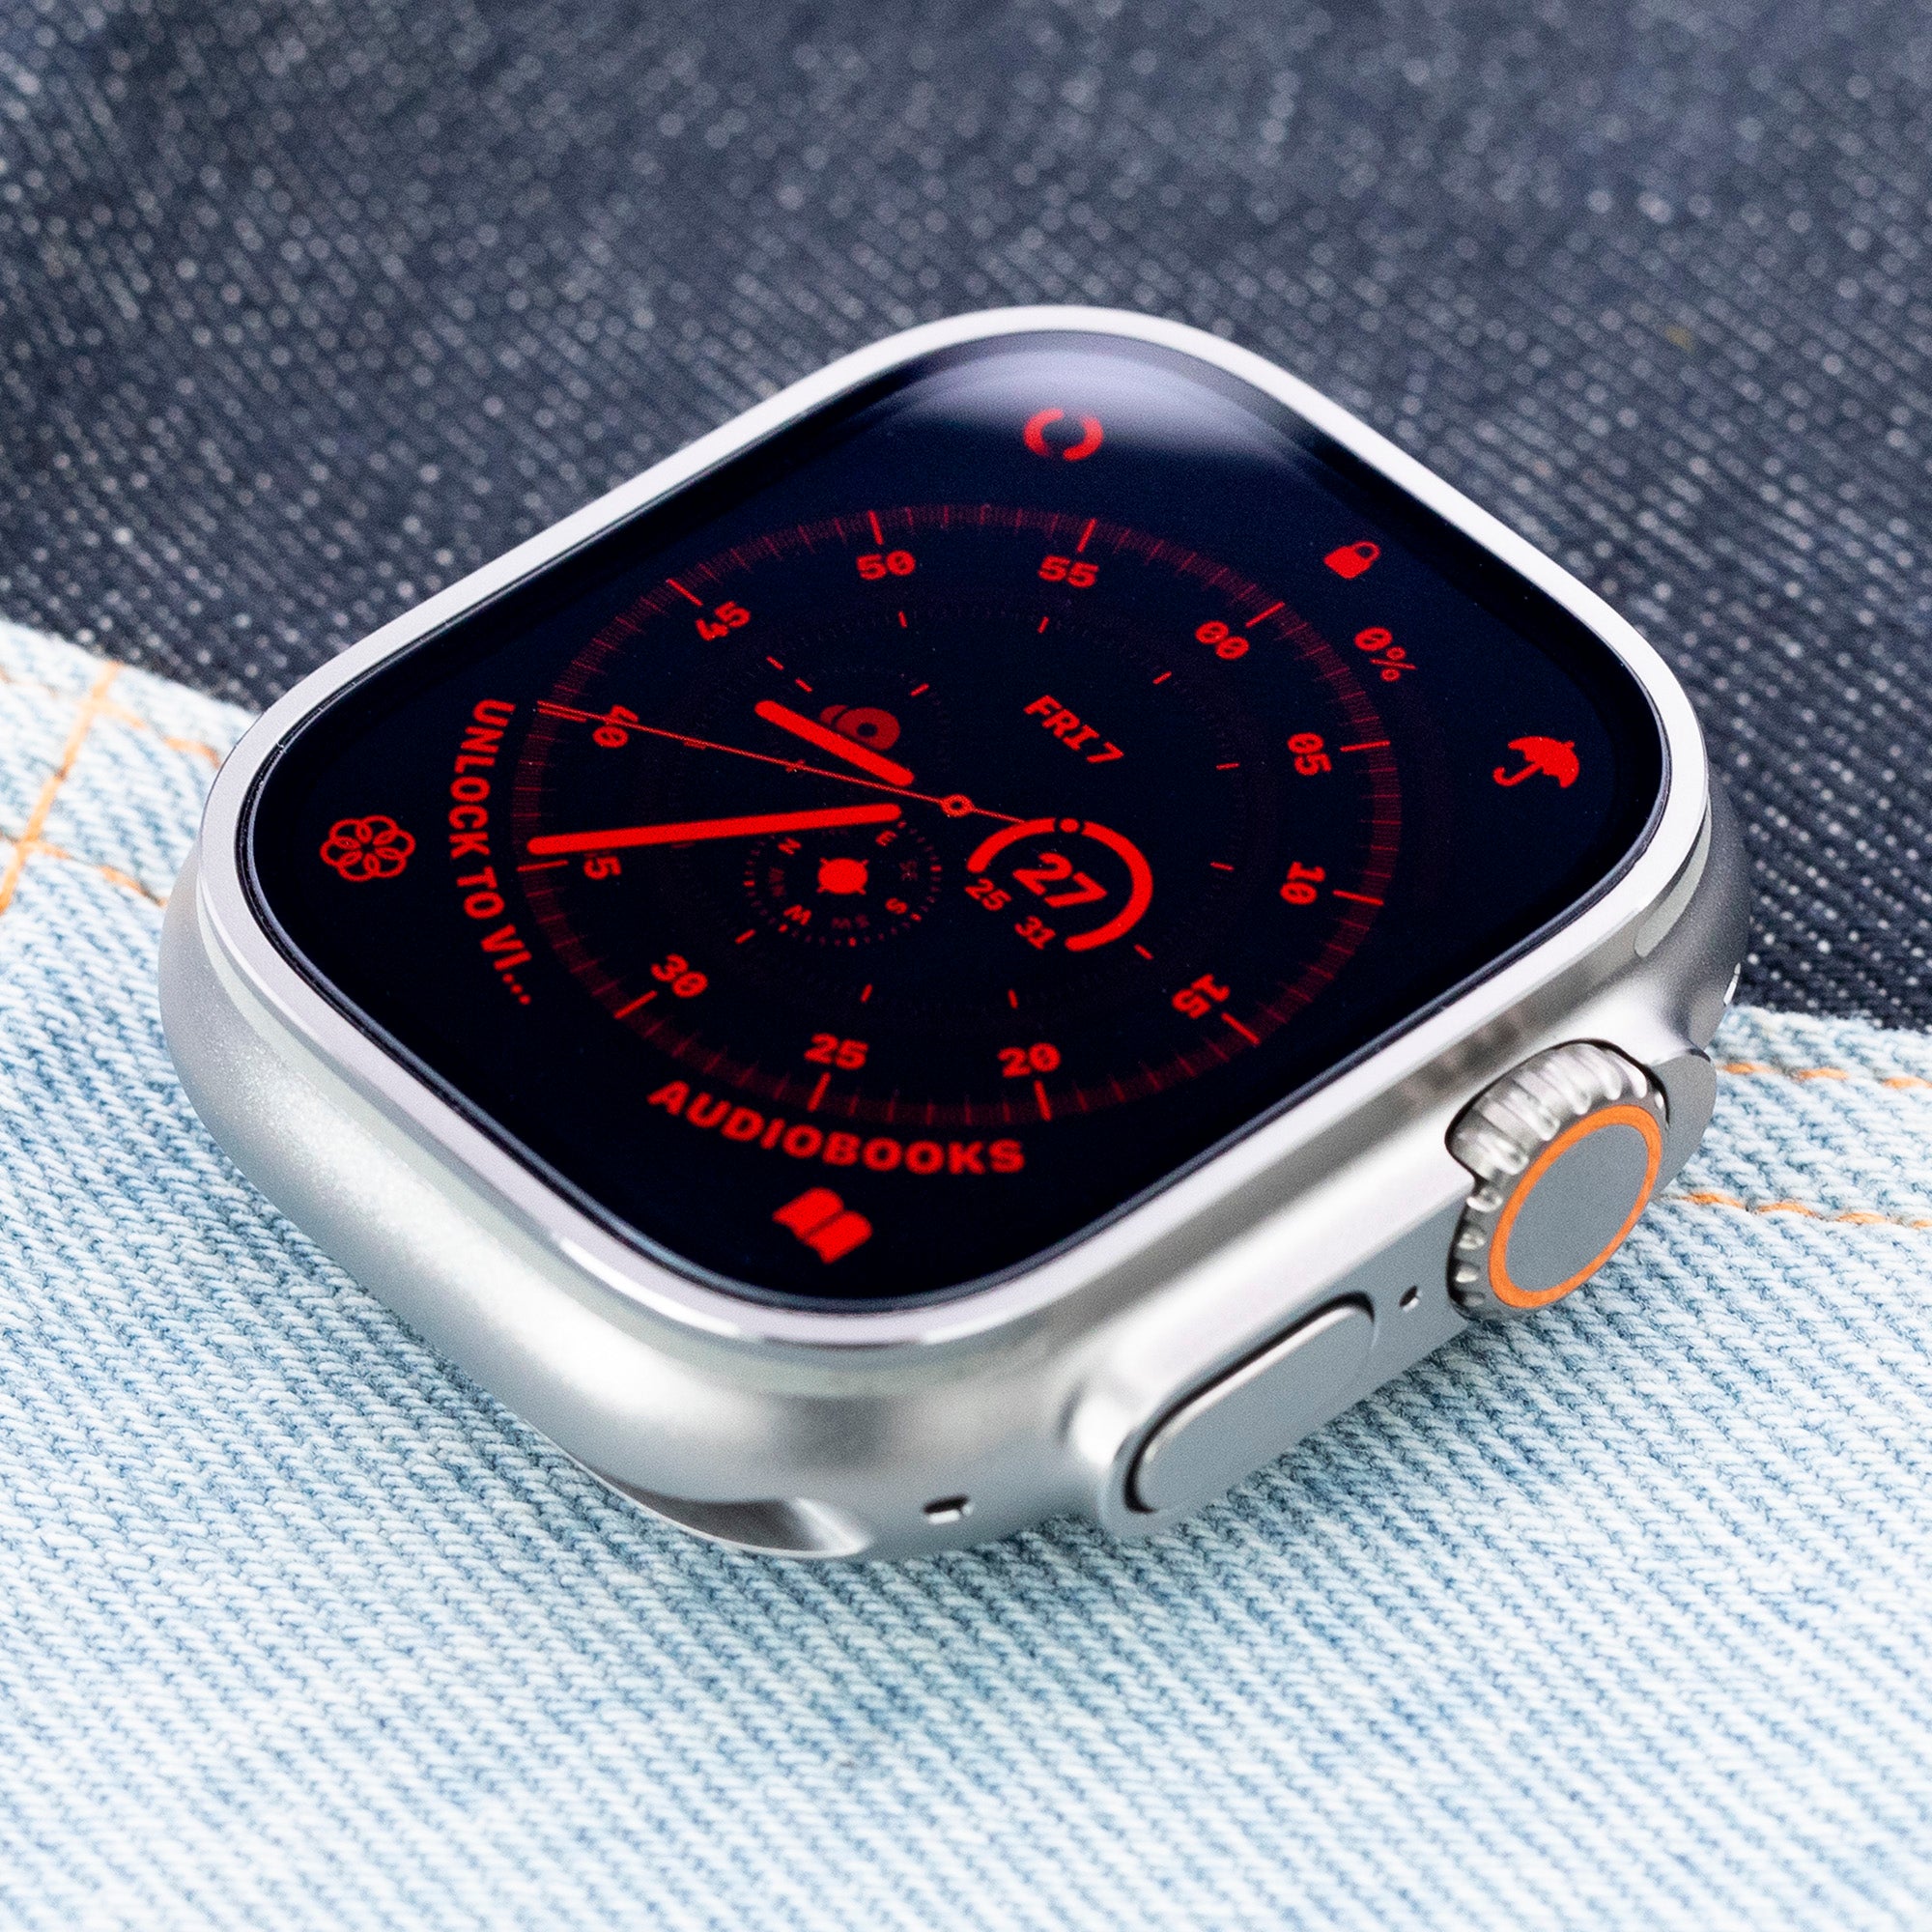 Apple Watch Ultra display twice as bright as its old models and the new red interface optimizes the visibility in the dark